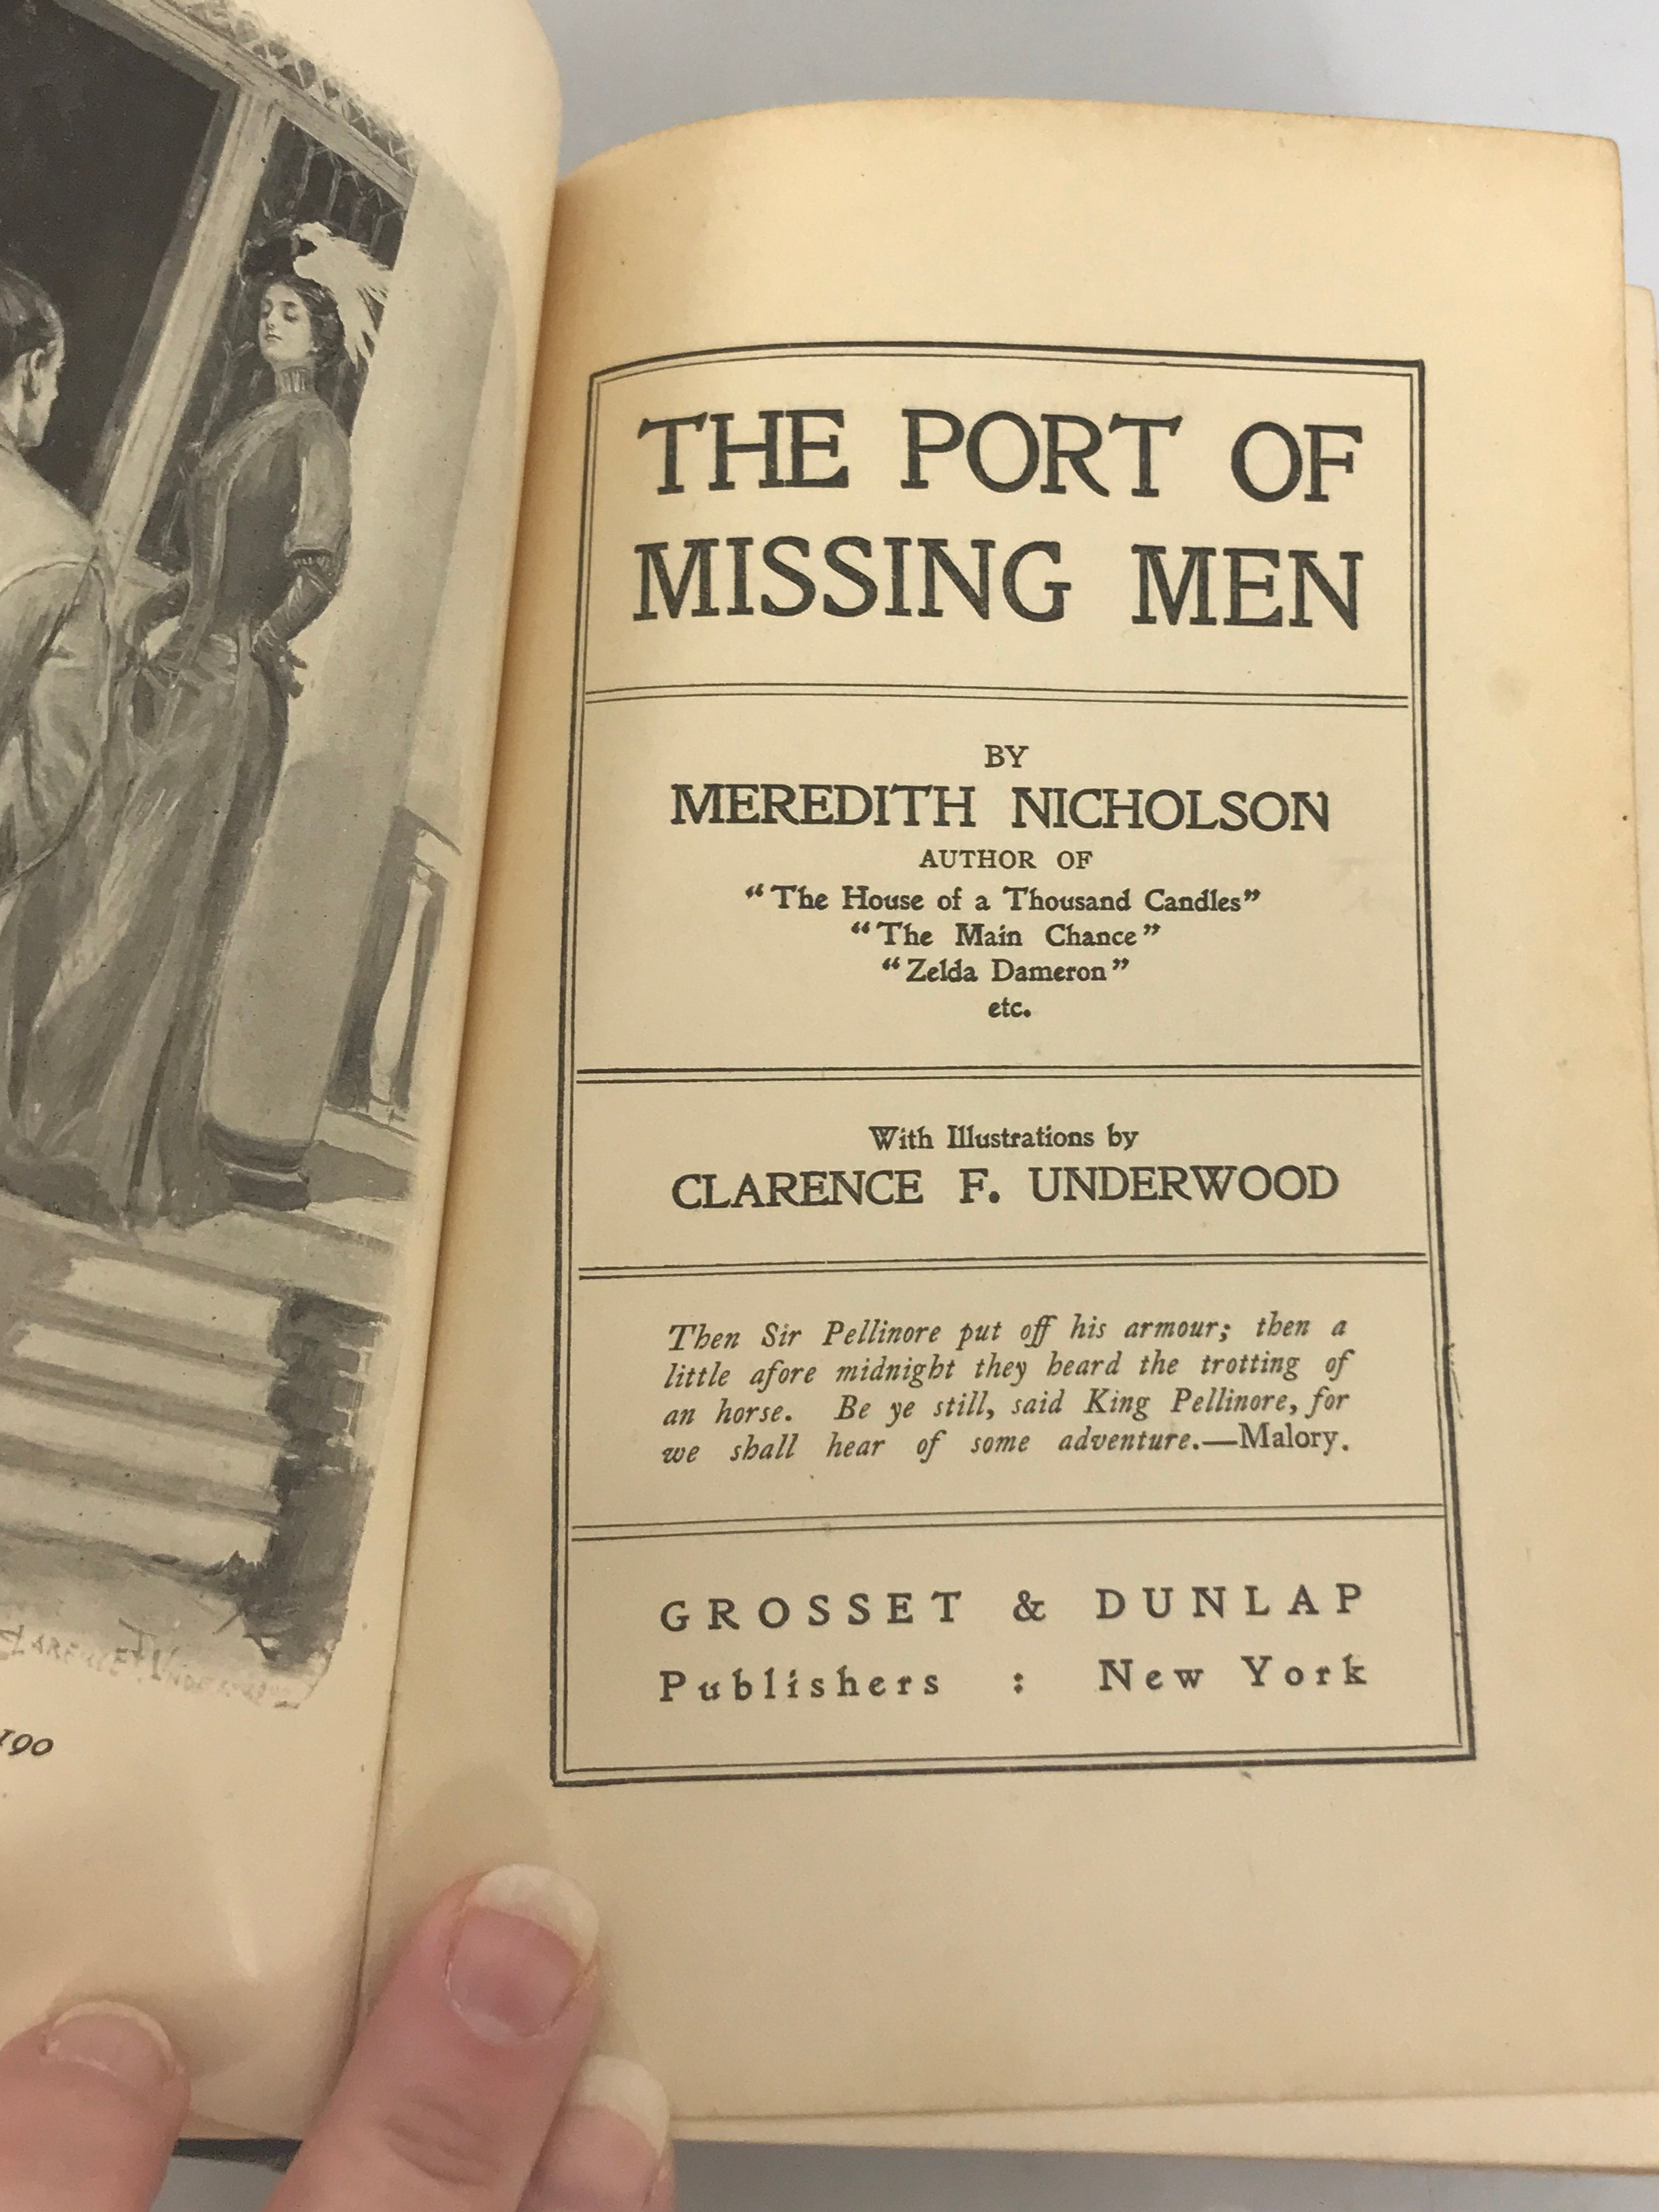 Lot of 2 Meredith Nicholson Books: The Port of Missing Men and Rosalind at Redgate (1907) HC Antique